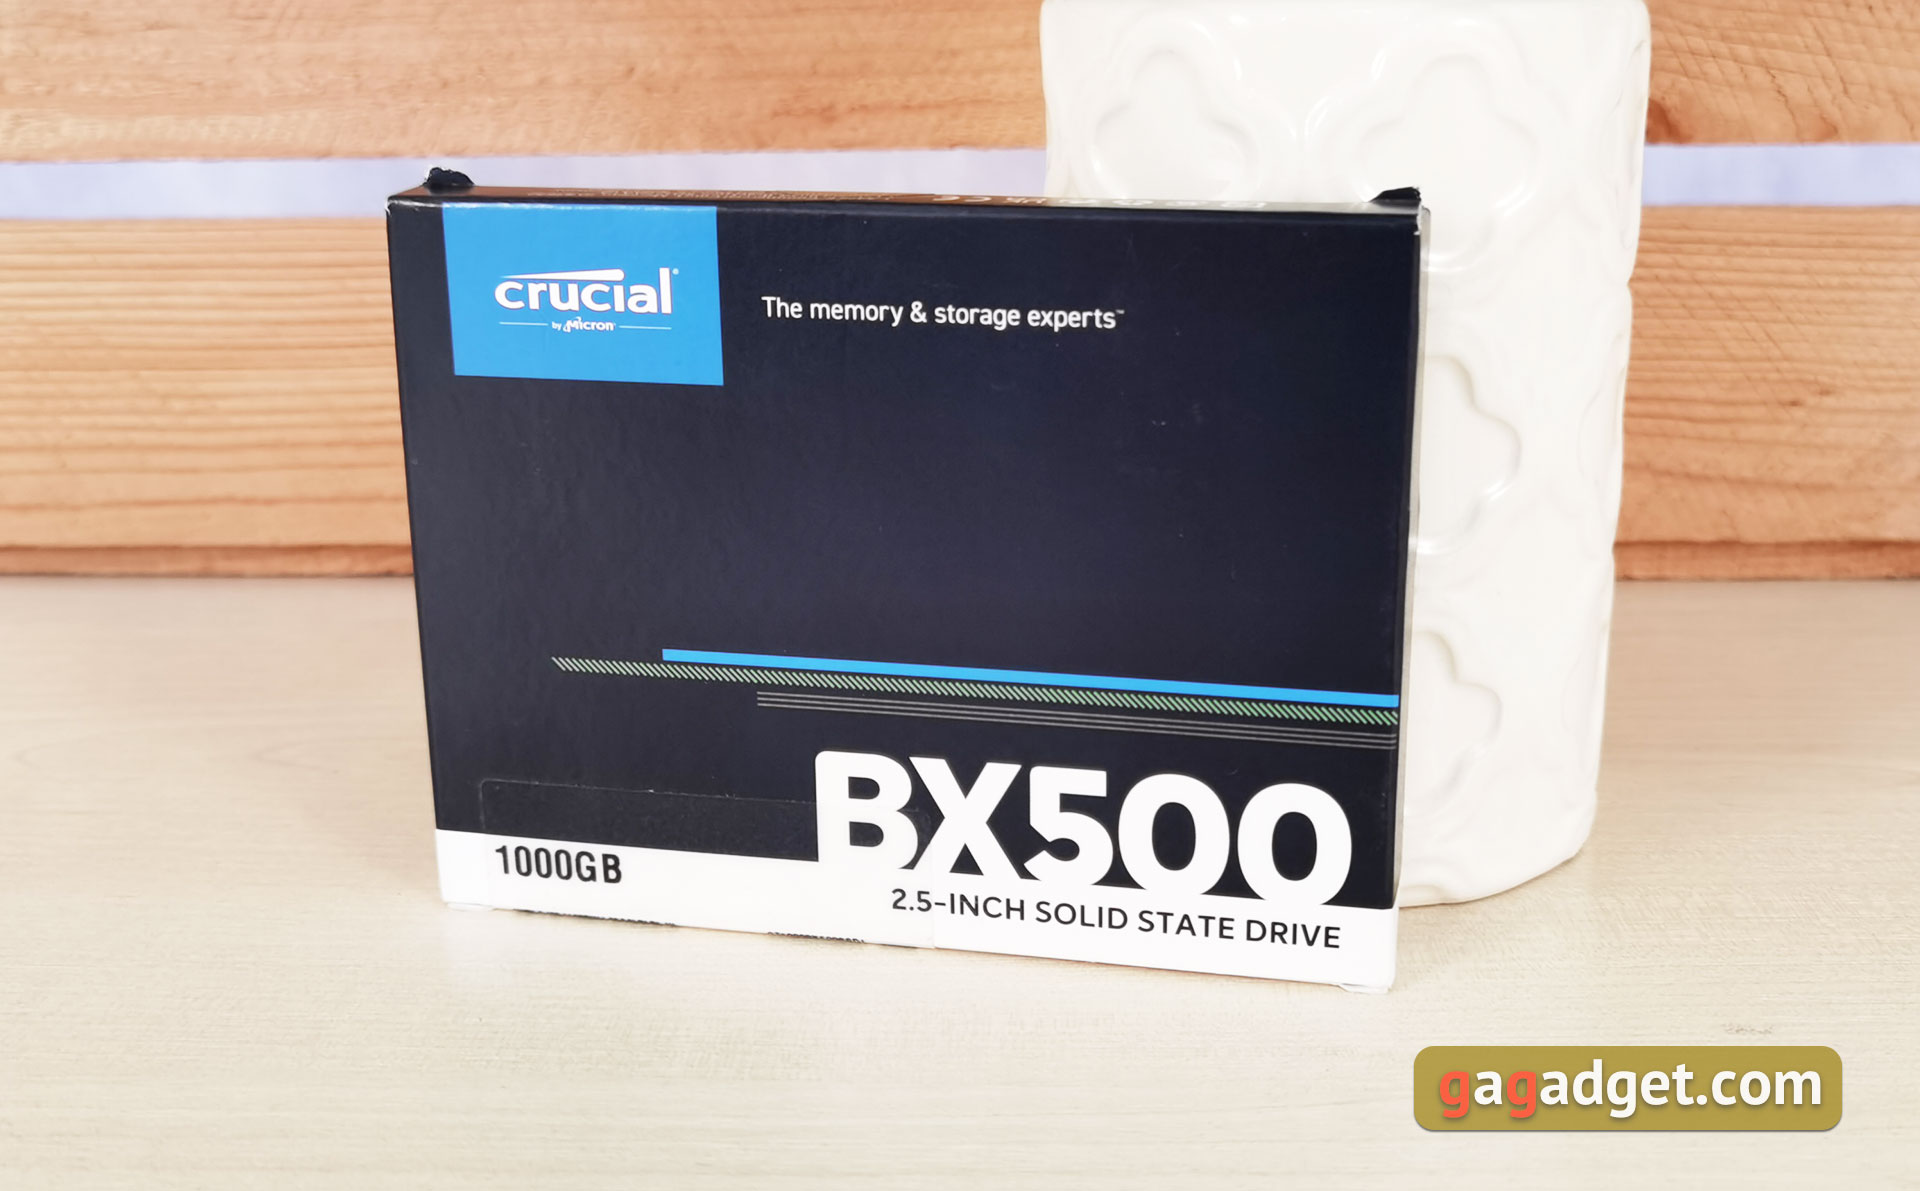 Crucial BX500 240gb SSD Review, Speed test, Installation